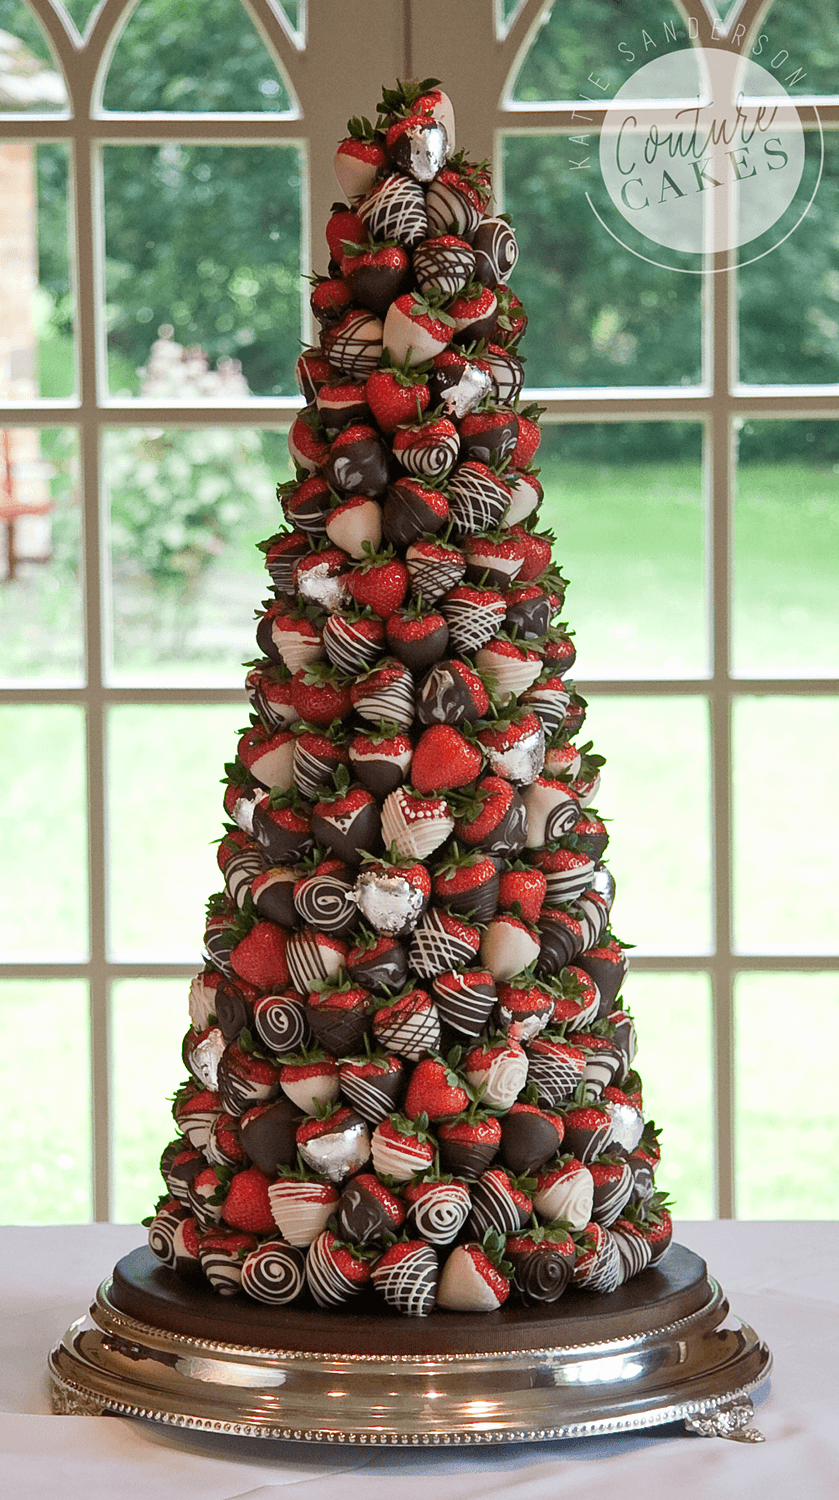 Provides 200 dipped strawberries, Price £395 (for 200 strawberries)